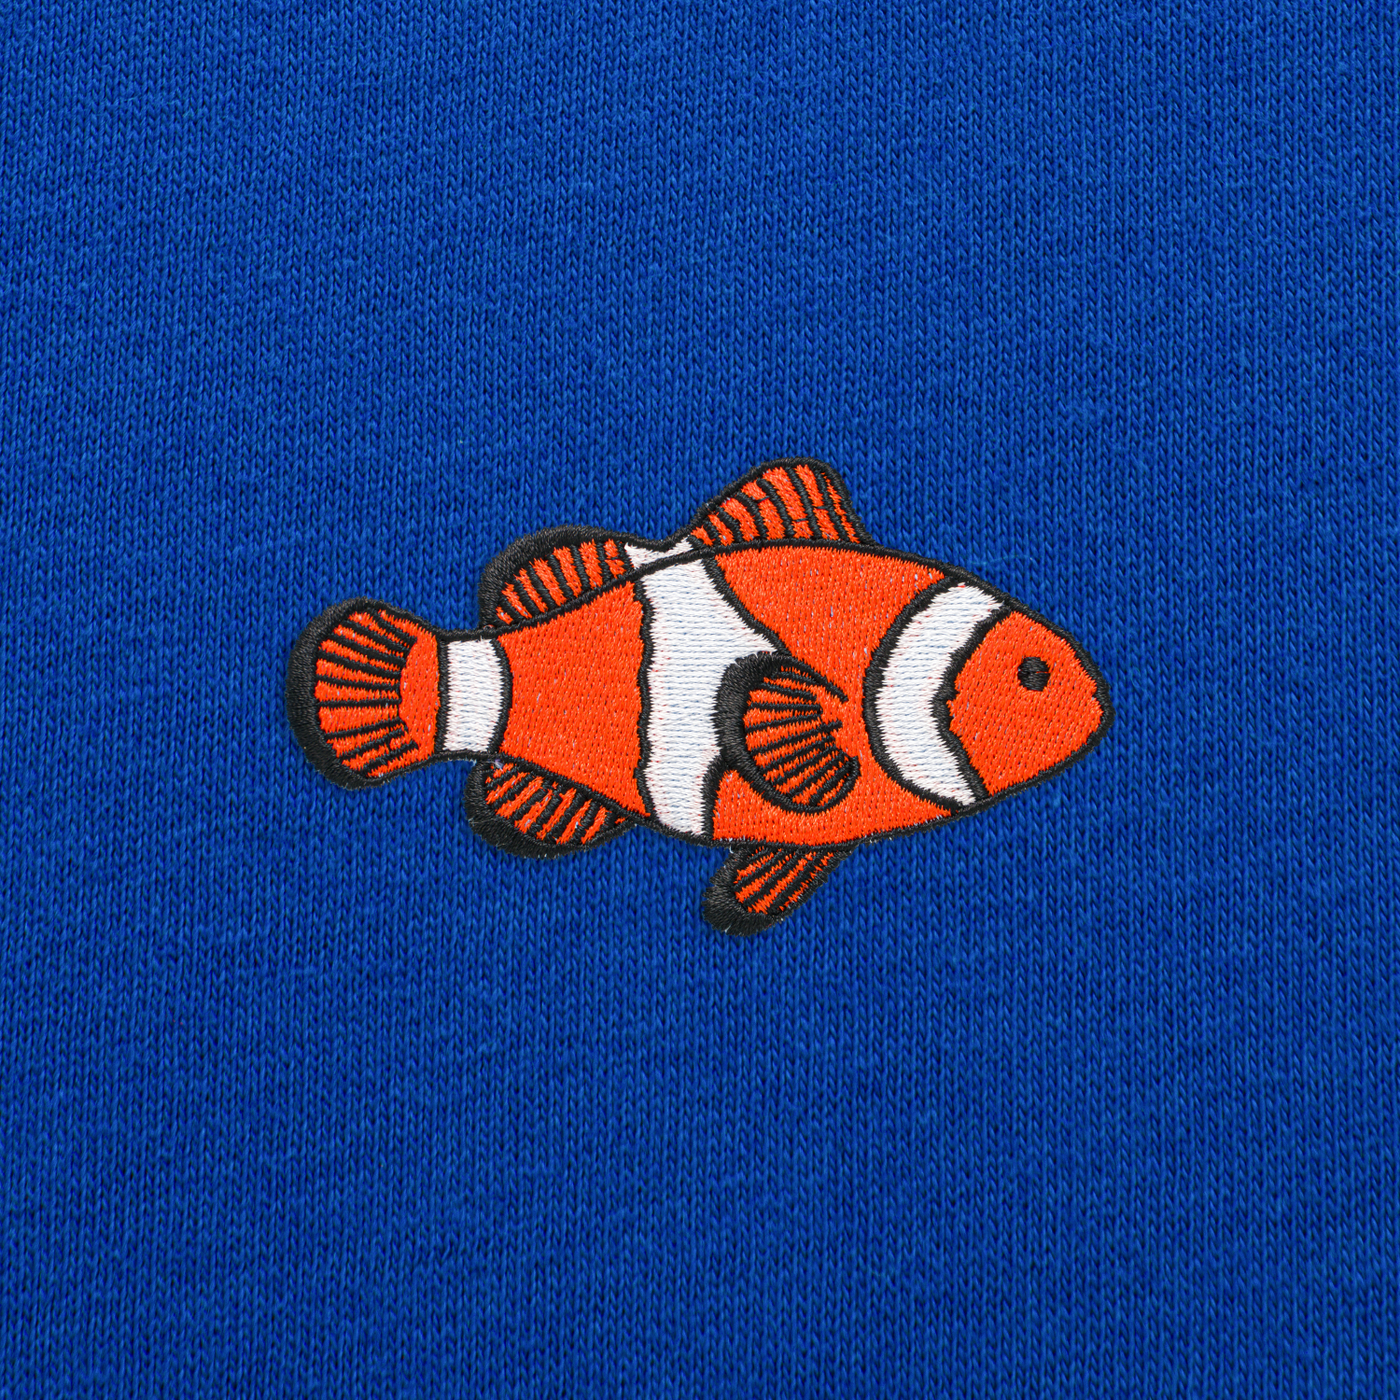 Bobby's Planet Women's Embroidered Clownfish T-Shirt from Seven Seas Fish Animals Collection in True Royal Color#color_true-royal